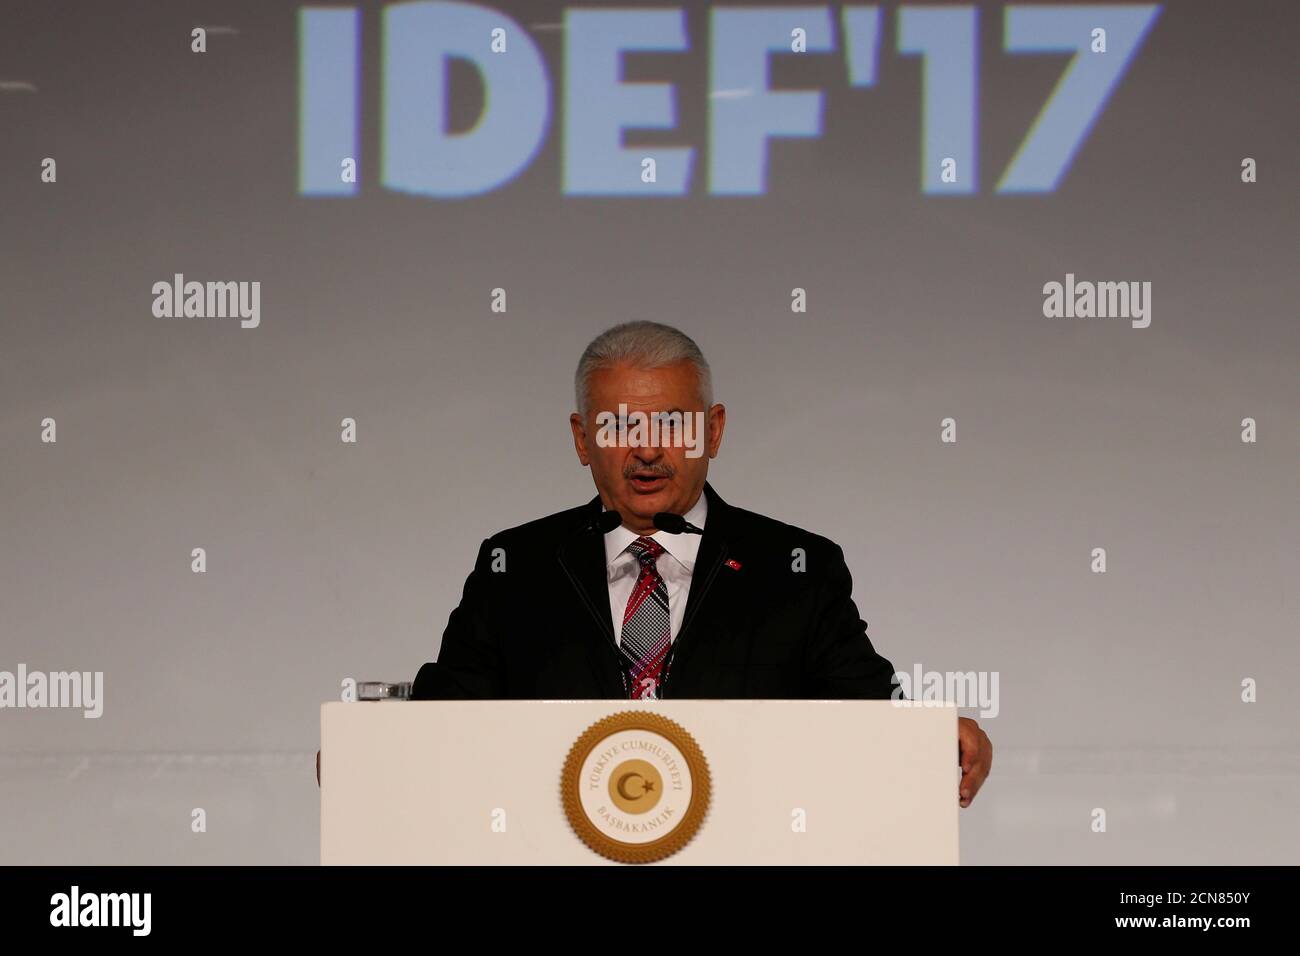 Turkish Prime Minister Binali Yildirim speaks during the opening ceremony of IDEFÕ17, the 13th International Defence Industry Fair, in Istanbul, Turkey, May 9, 2017. REUTERS/Murad Sezer Stock Photo